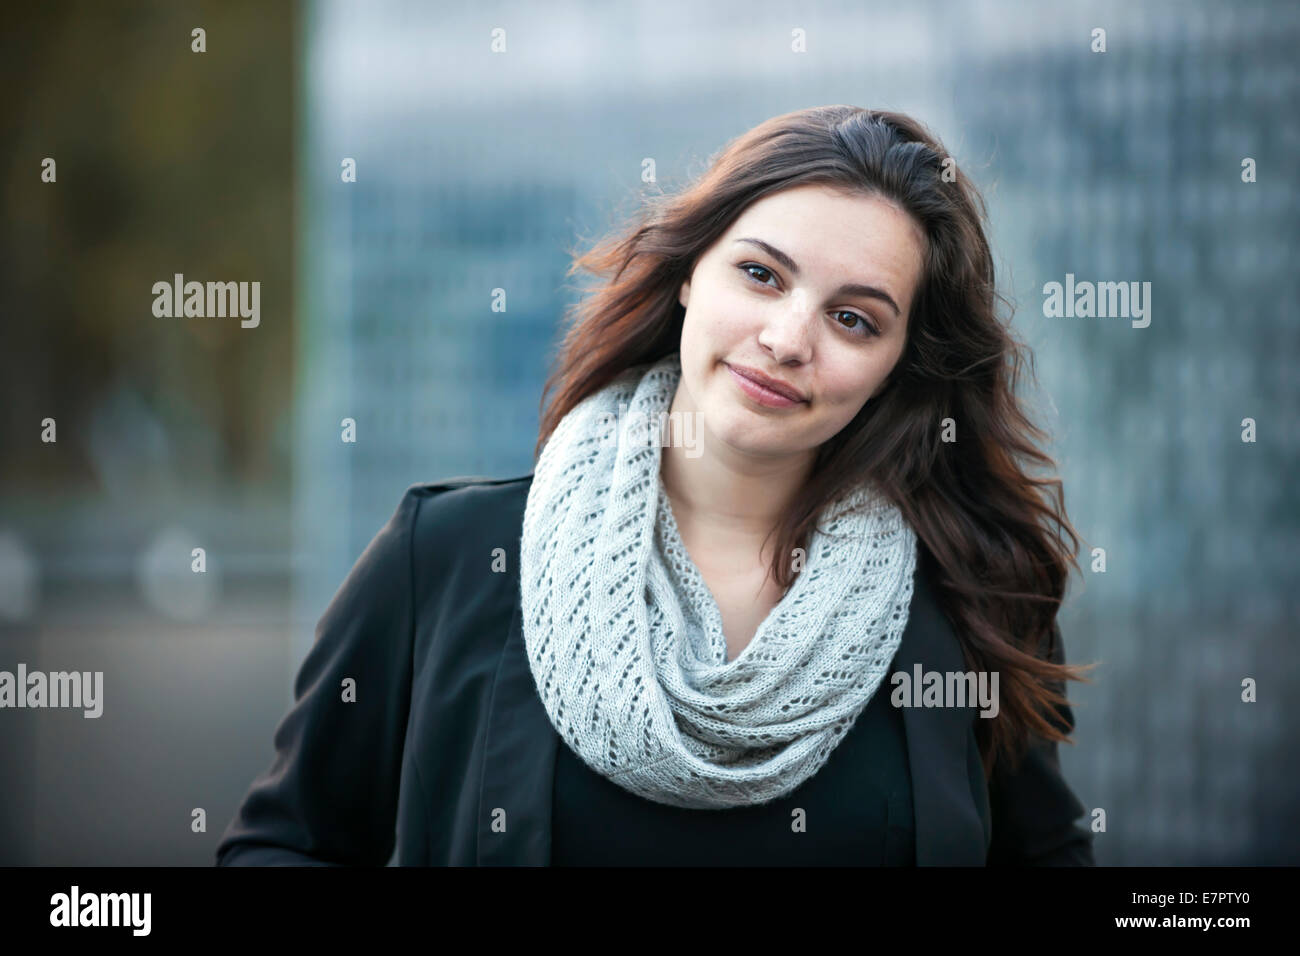 Candid portrait of young brunette woman looking away outside with copy space Stock Photo